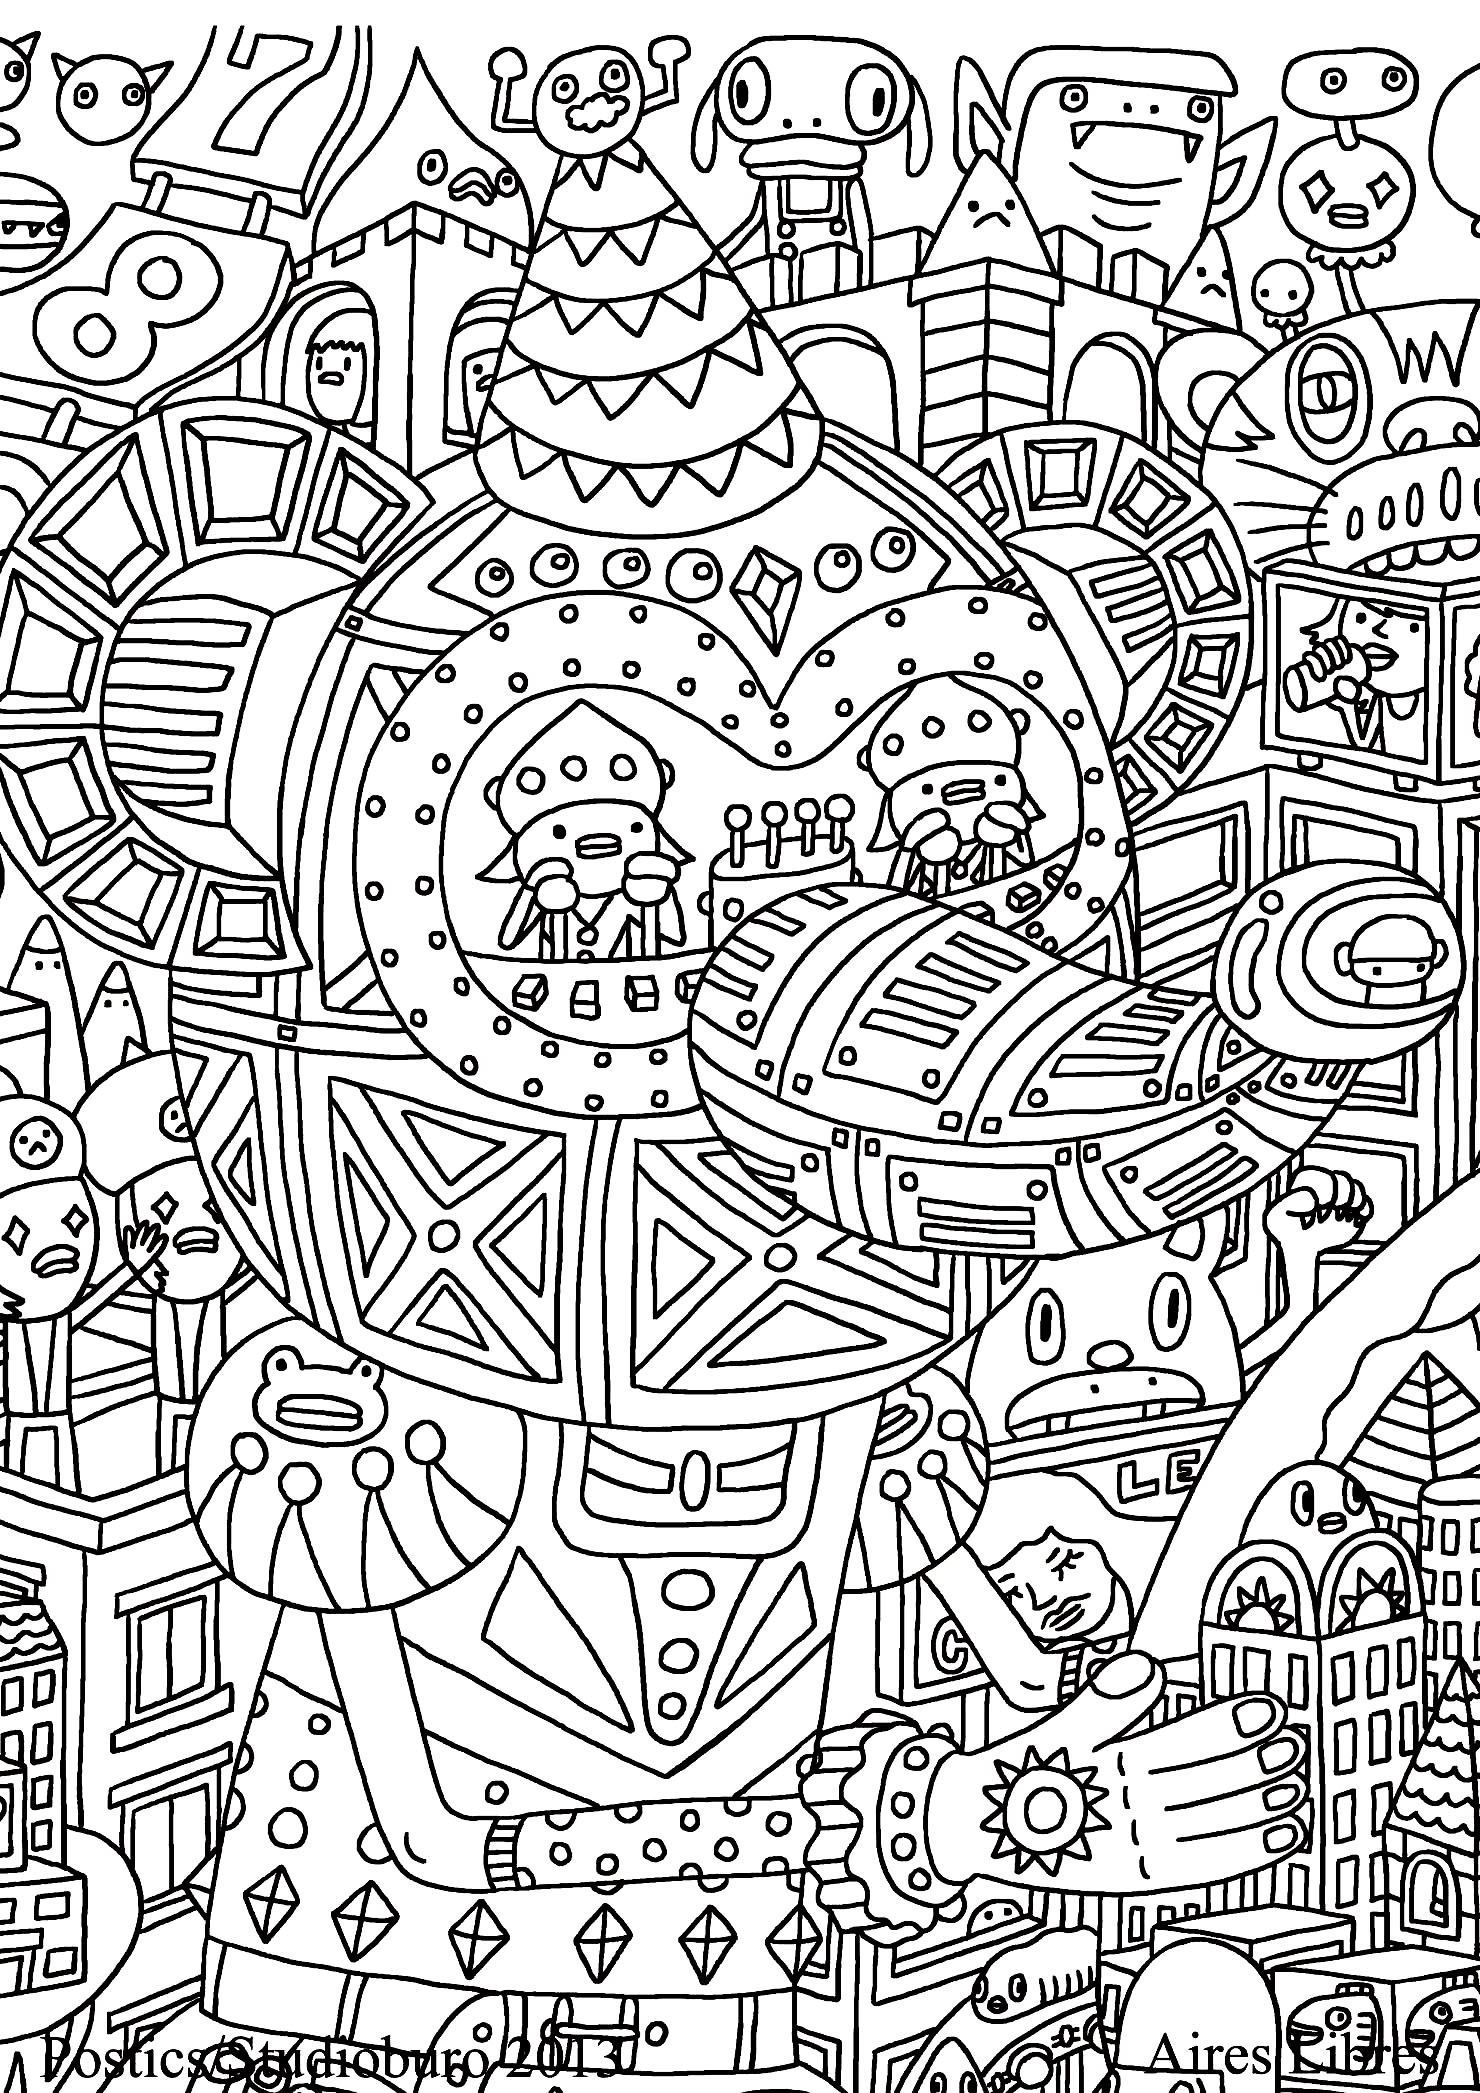 Beautiful Doodle Art coloring page